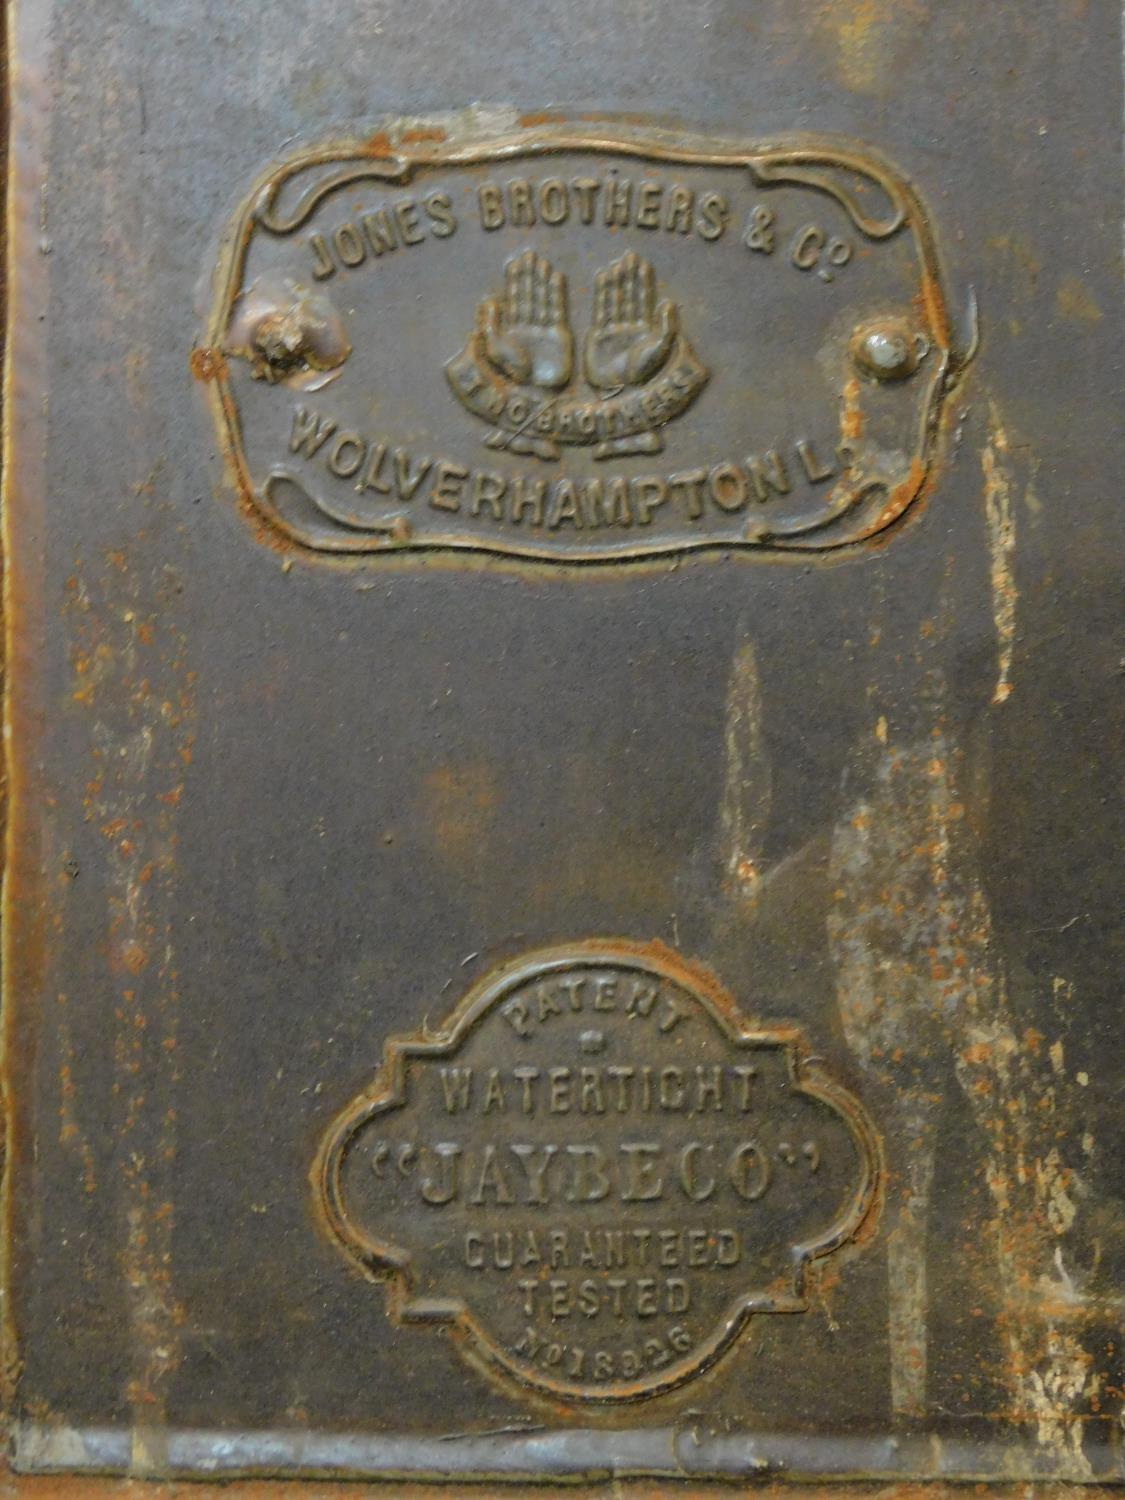 A 'Watertight Jaybeco' metal ammo box by Jones Brothers & Co., Wolverhampton, H.24 W.70 D.38cm - Image 6 of 6